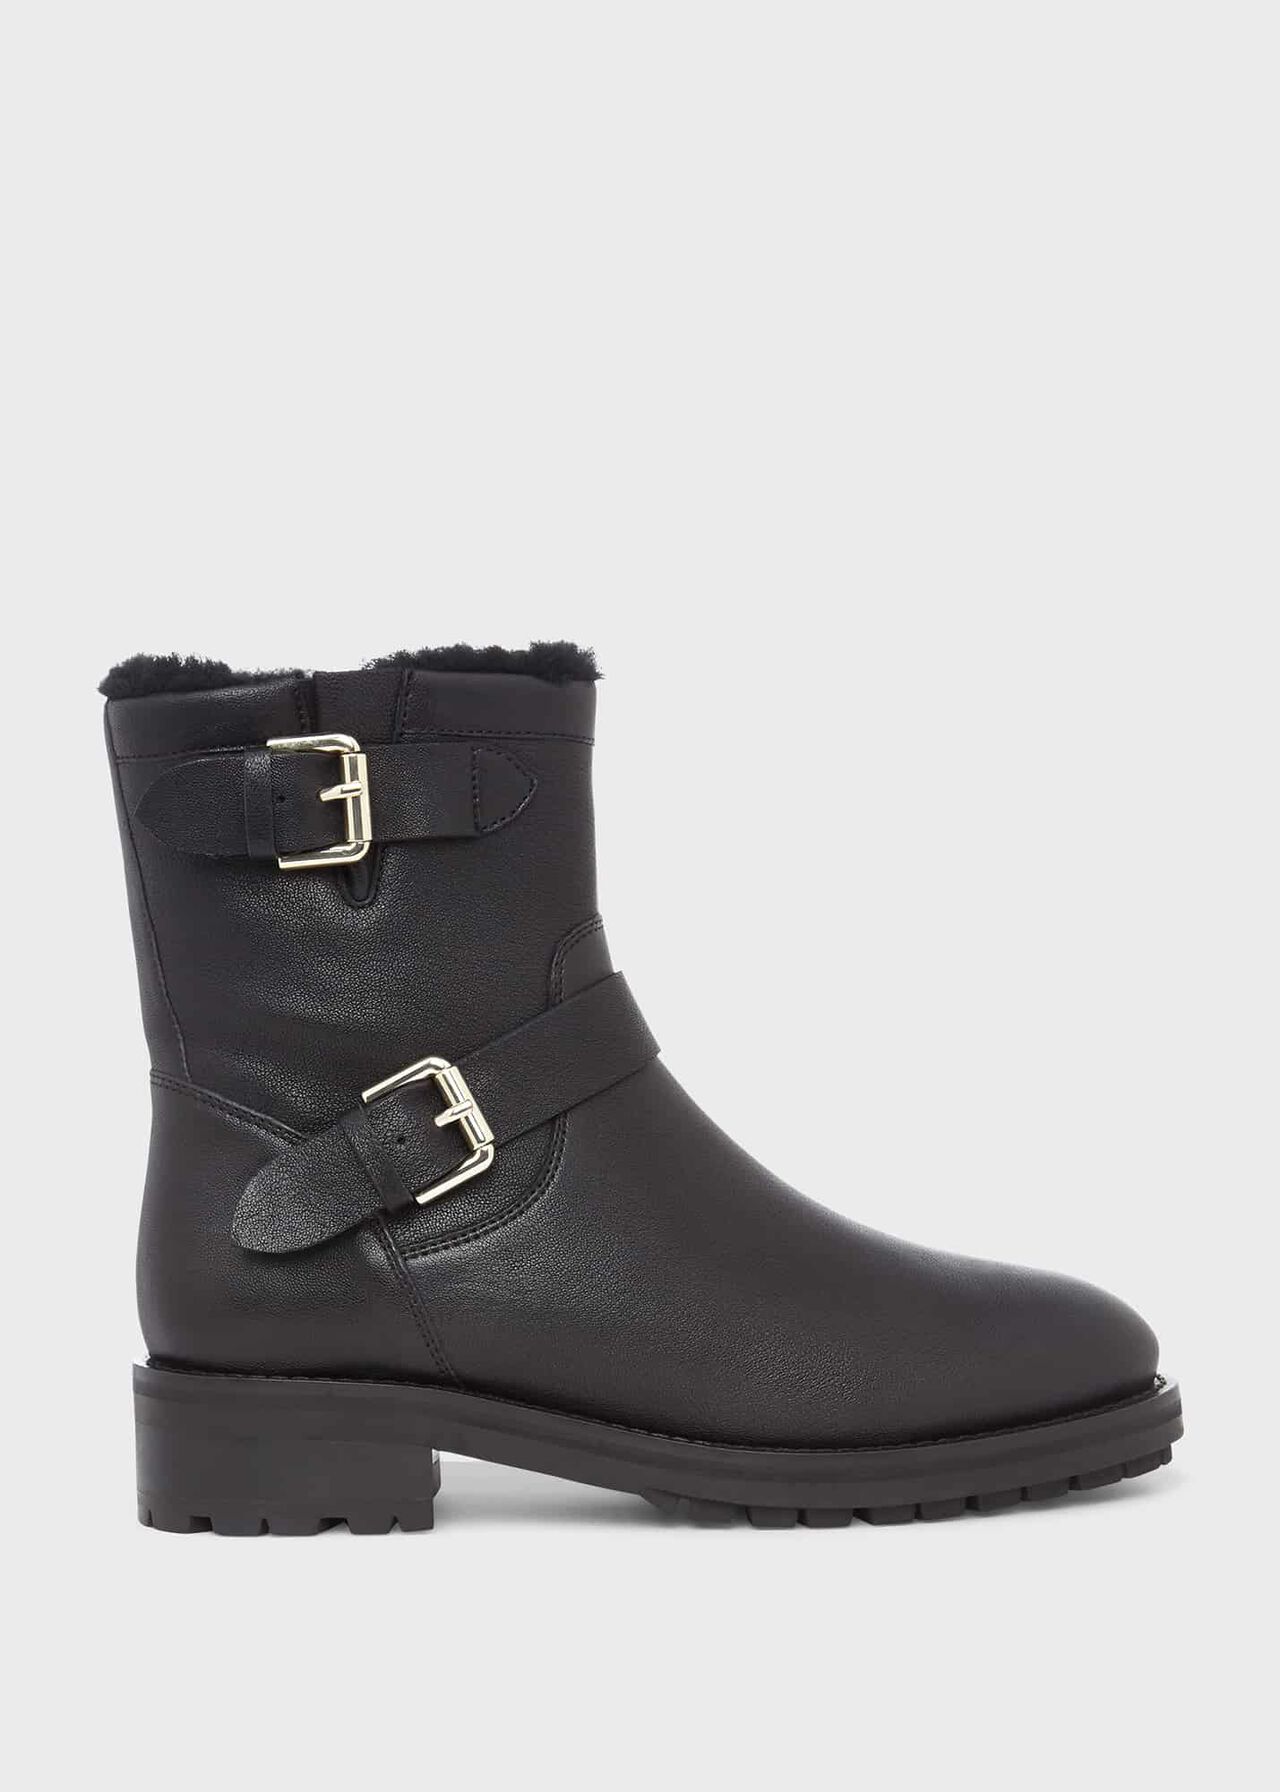 Philippa Ankle Boots, Black, hi-res